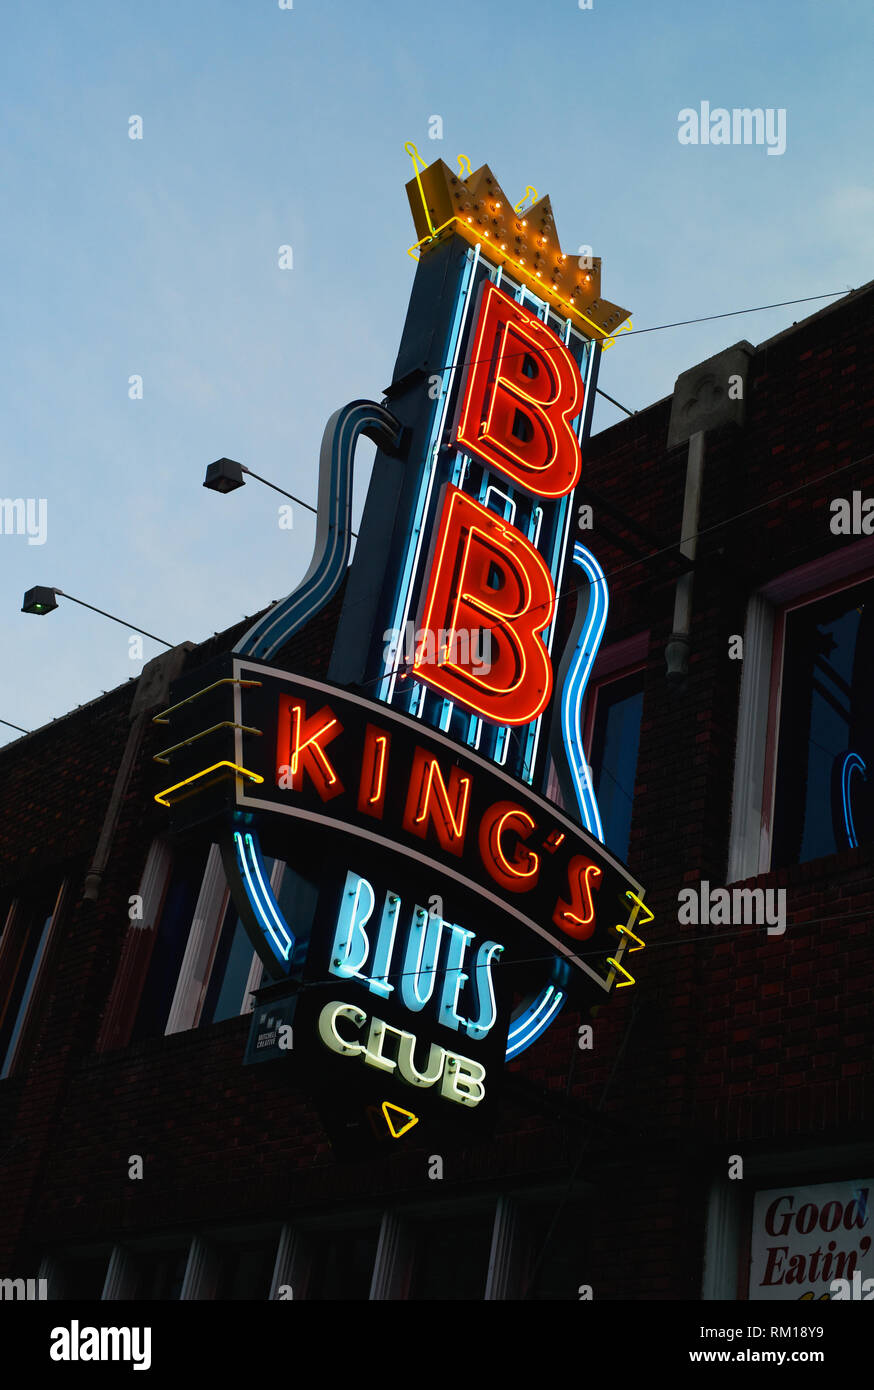 Memphis, Tennessee - July 21 2009: The Illuminated neon sign of BB King's Blues Club on Beale Street in Memphis, Tennessee. Stock Photo